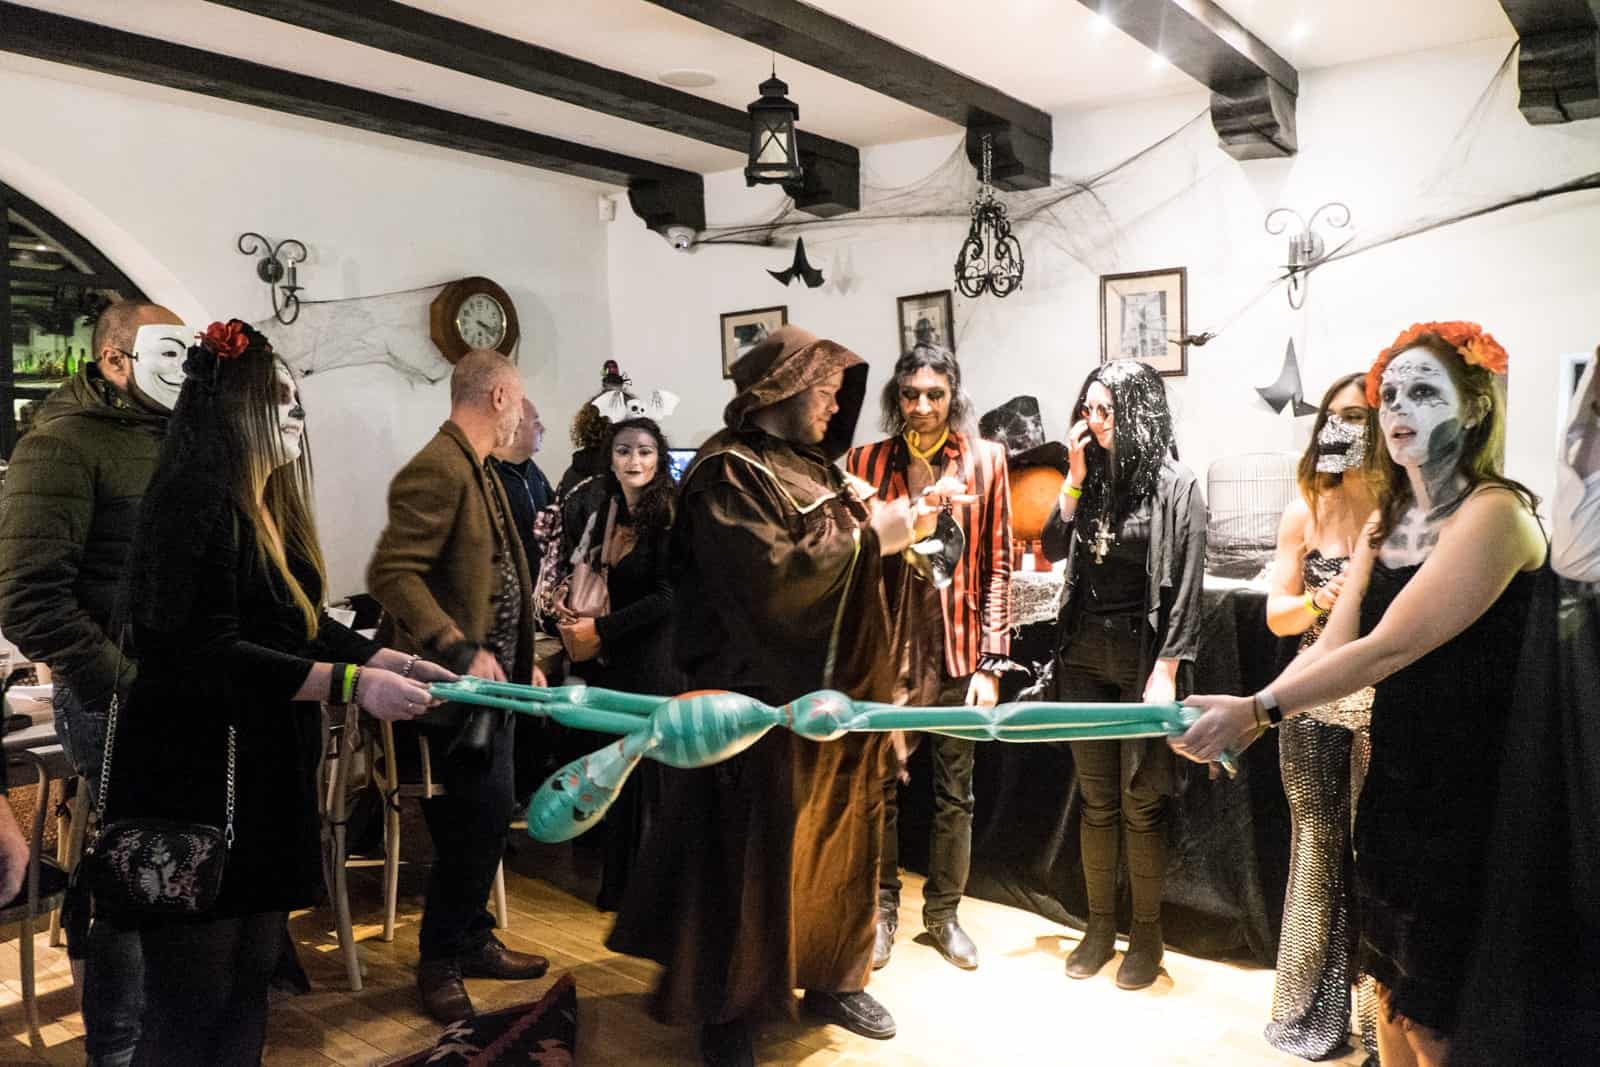 A group of people in costume, pulling a green inflatable alien at a Halloween party inside the white walls and dark beam roofed room at Bran Castle. 